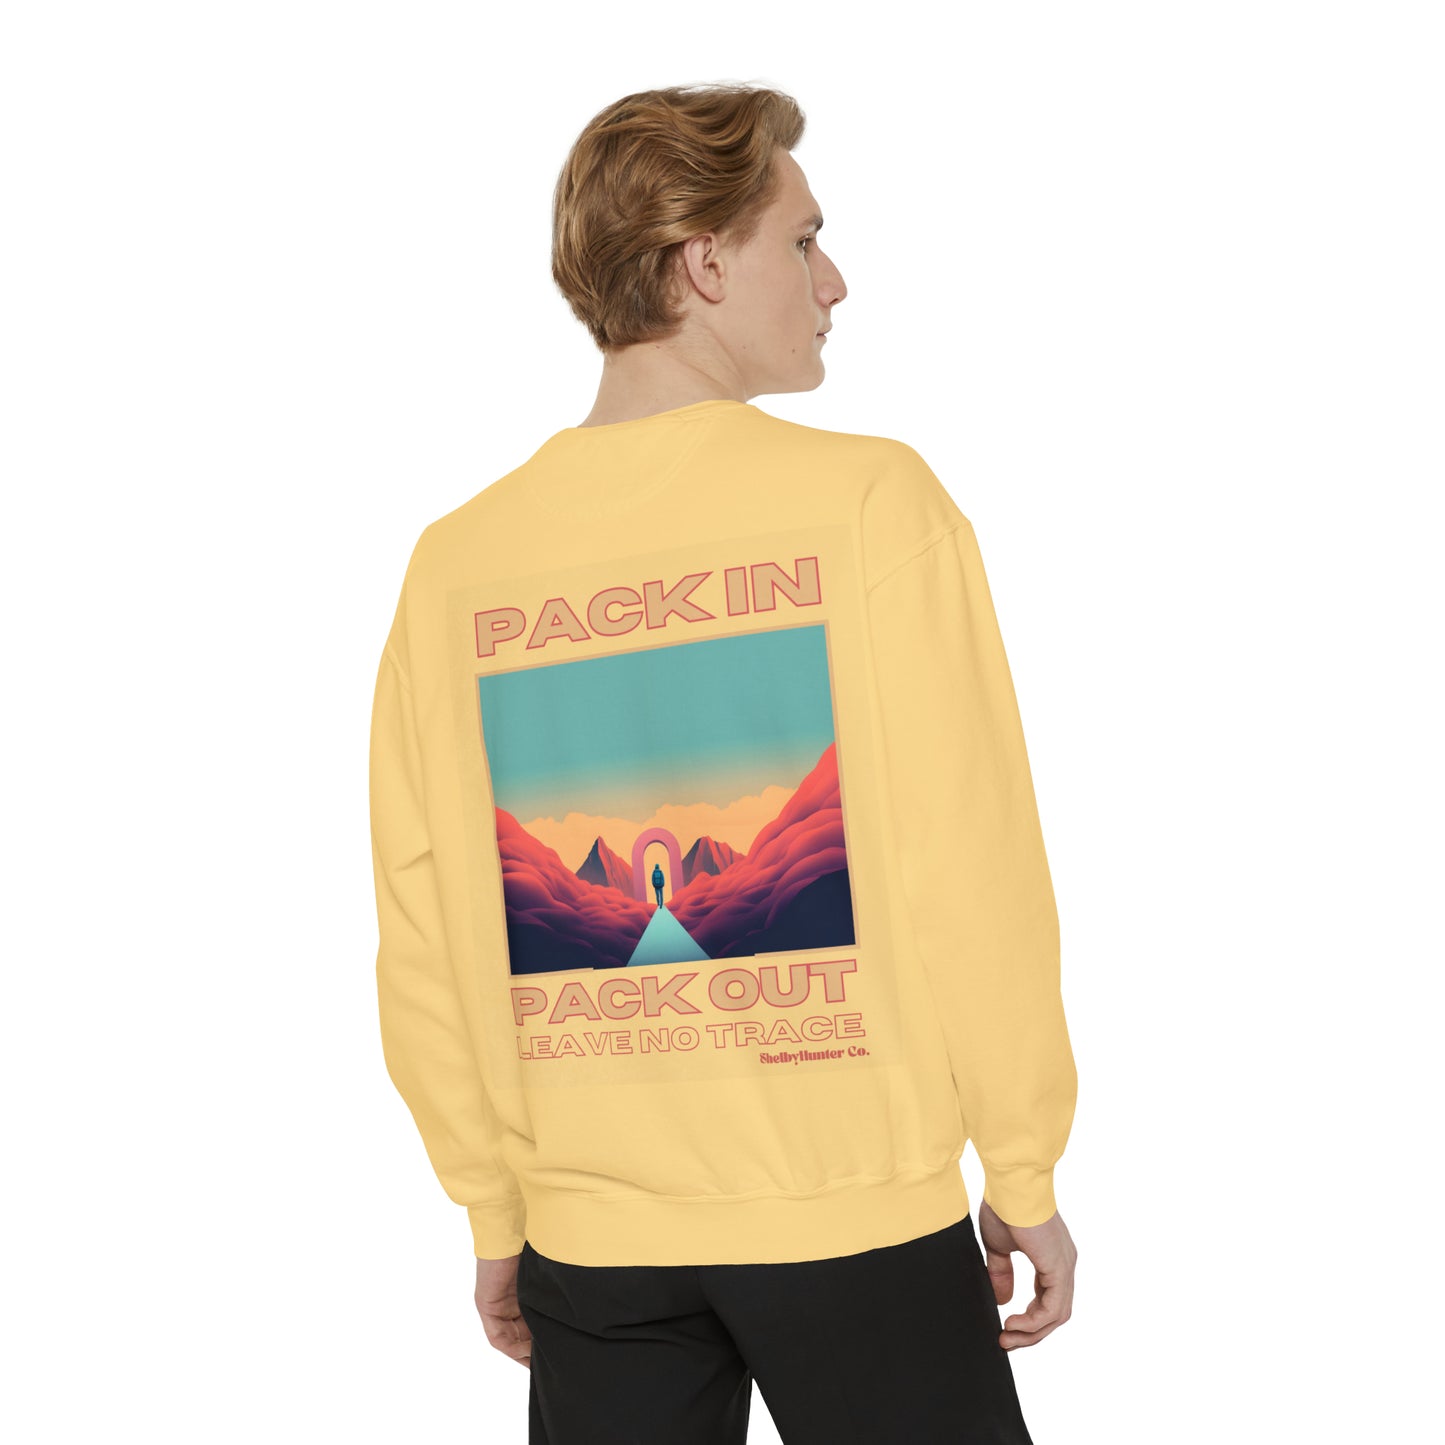 'Pack In, Pack Out' Comfort Colors Sweatshirt